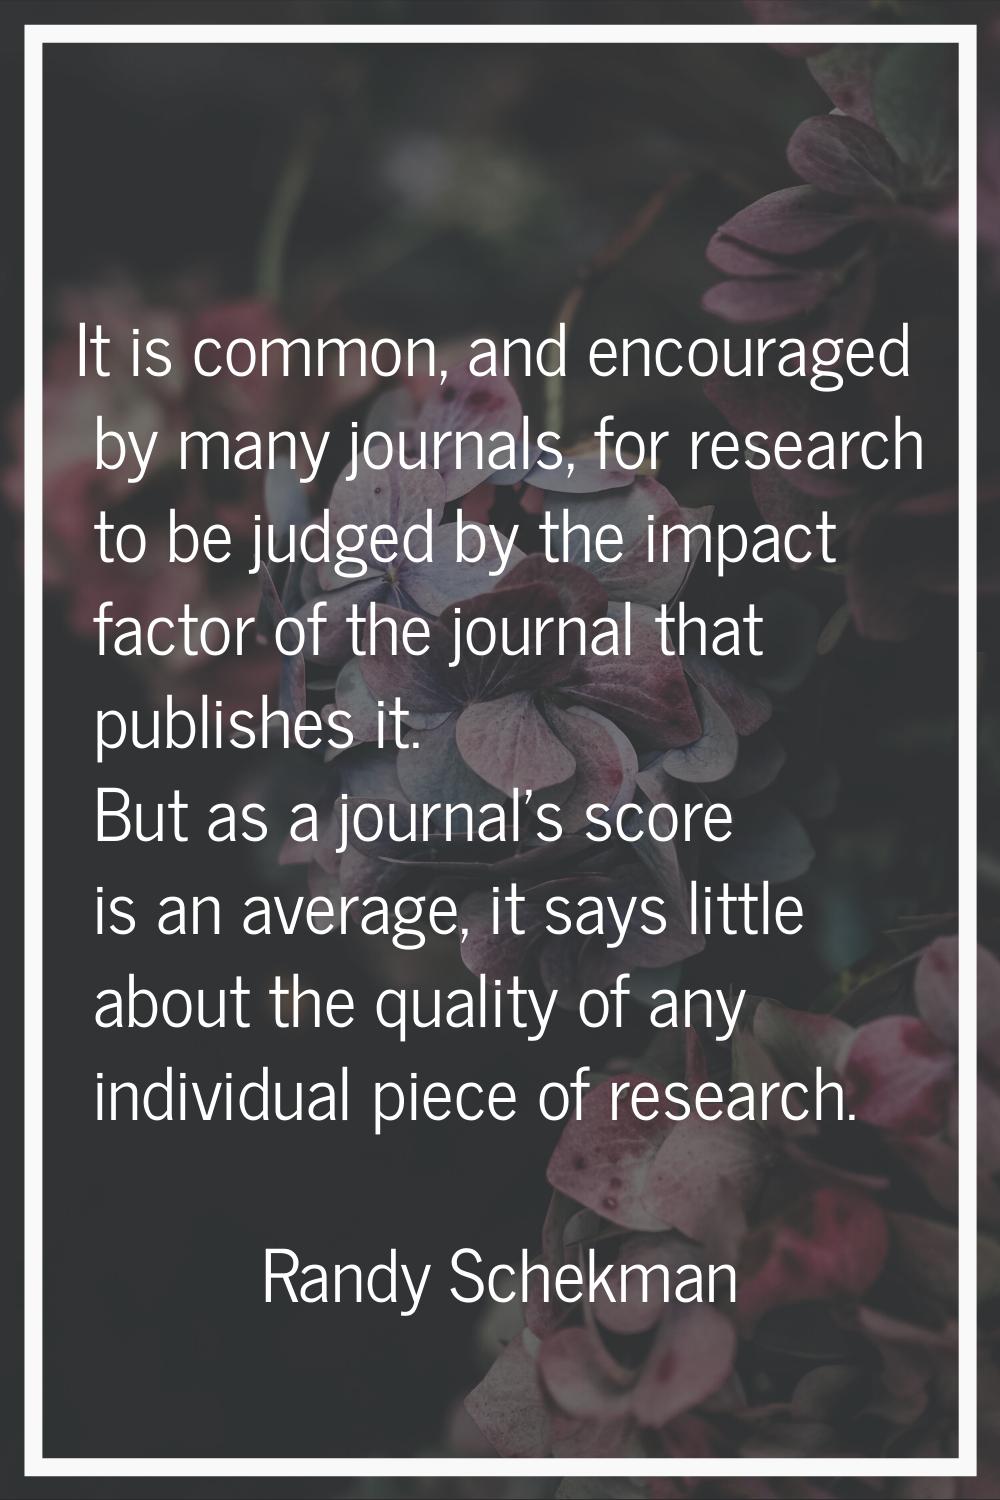 It is common, and encouraged by many journals, for research to be judged by the impact factor of th